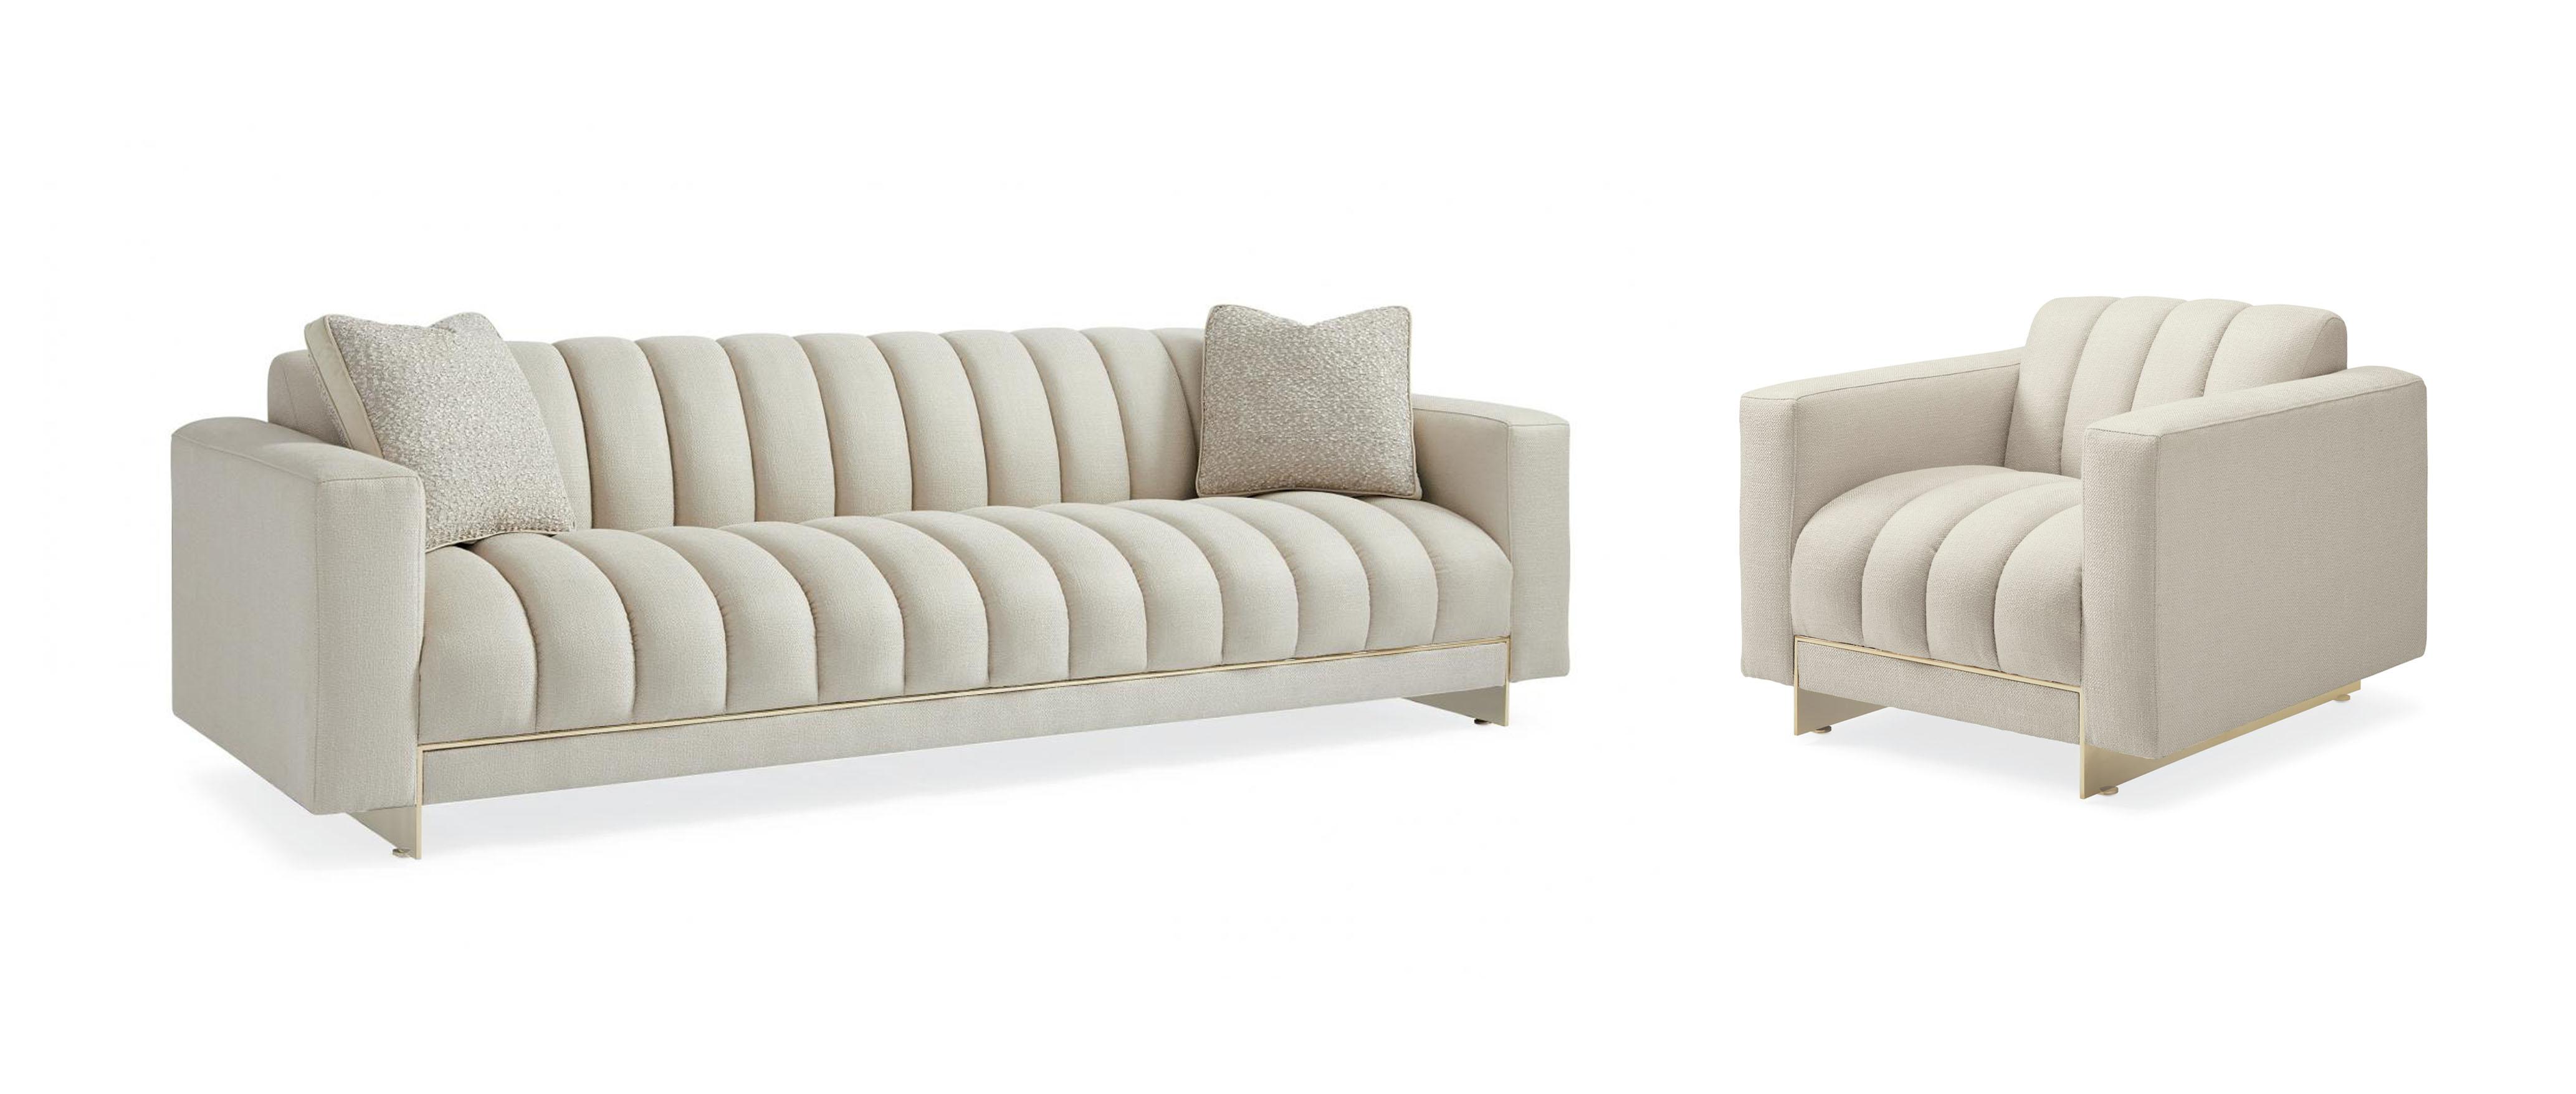 

    
Shimmering Moonstone Fabric THE WELL-BALANCED Sofa & Chair Set by Caracole
